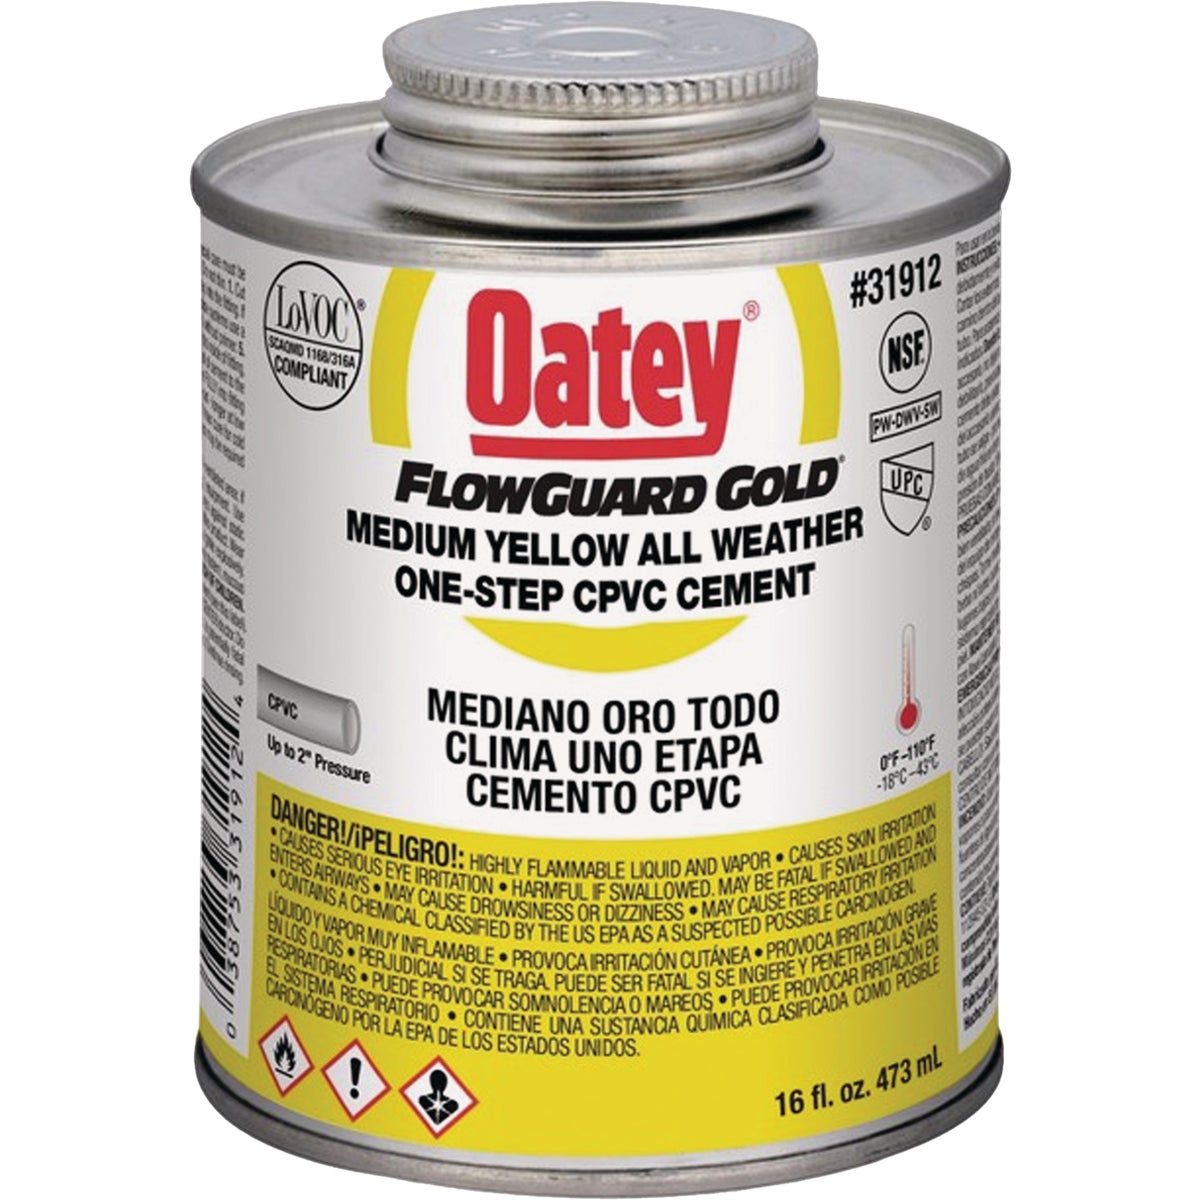 Oatey FlowGuard Gold 16 Oz. Medium Bodied Yellow All Weather One-Step CPVC Cement